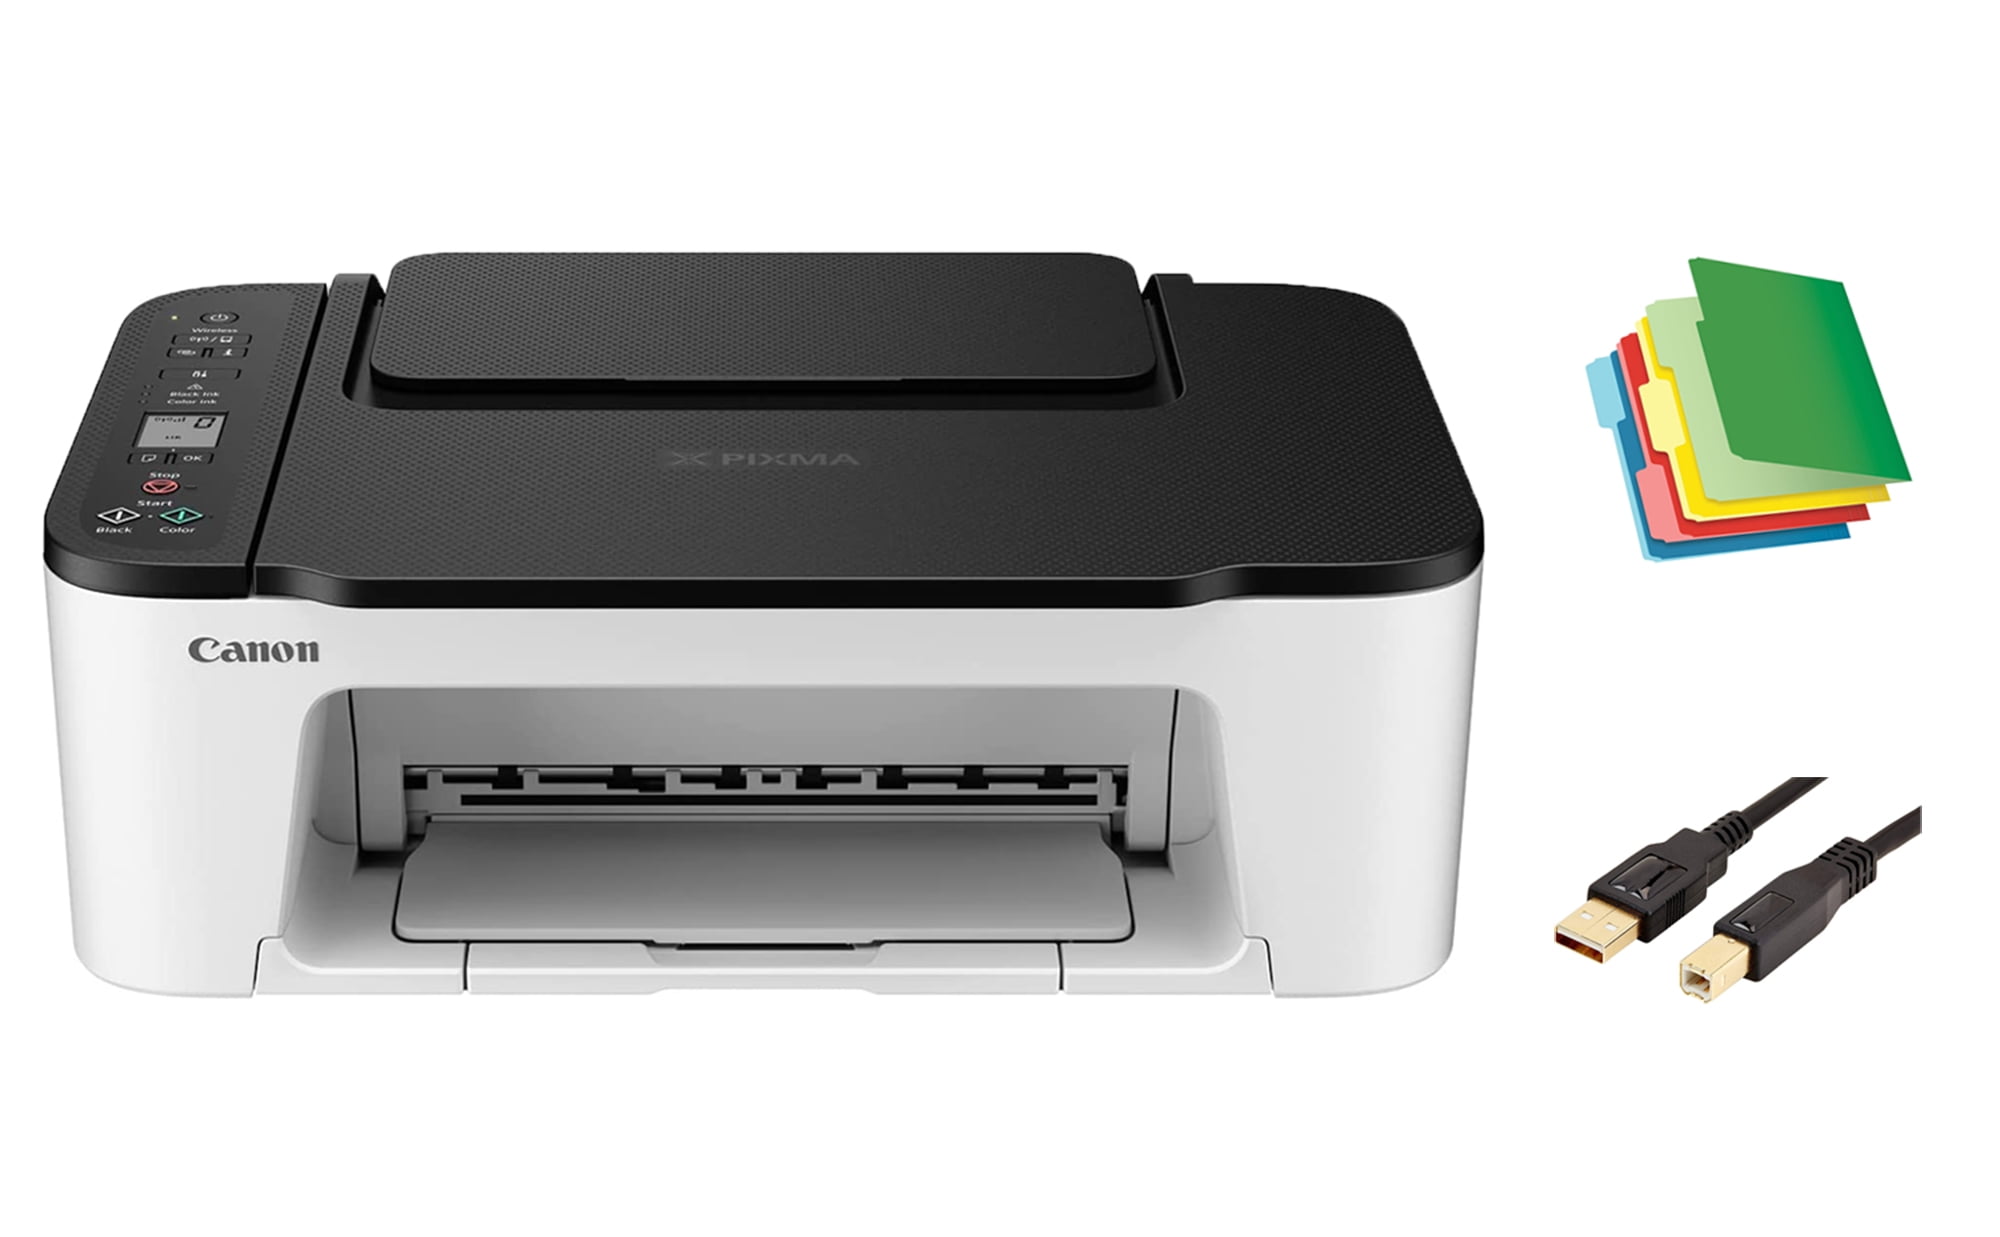 Printer, Color Scan, Inkjet TS35 Copy dpi, All-in-One Wireless 4800 PIXMA Series Printer, Printer Printing, Mobile LCD, Canon Cable with 1.5\